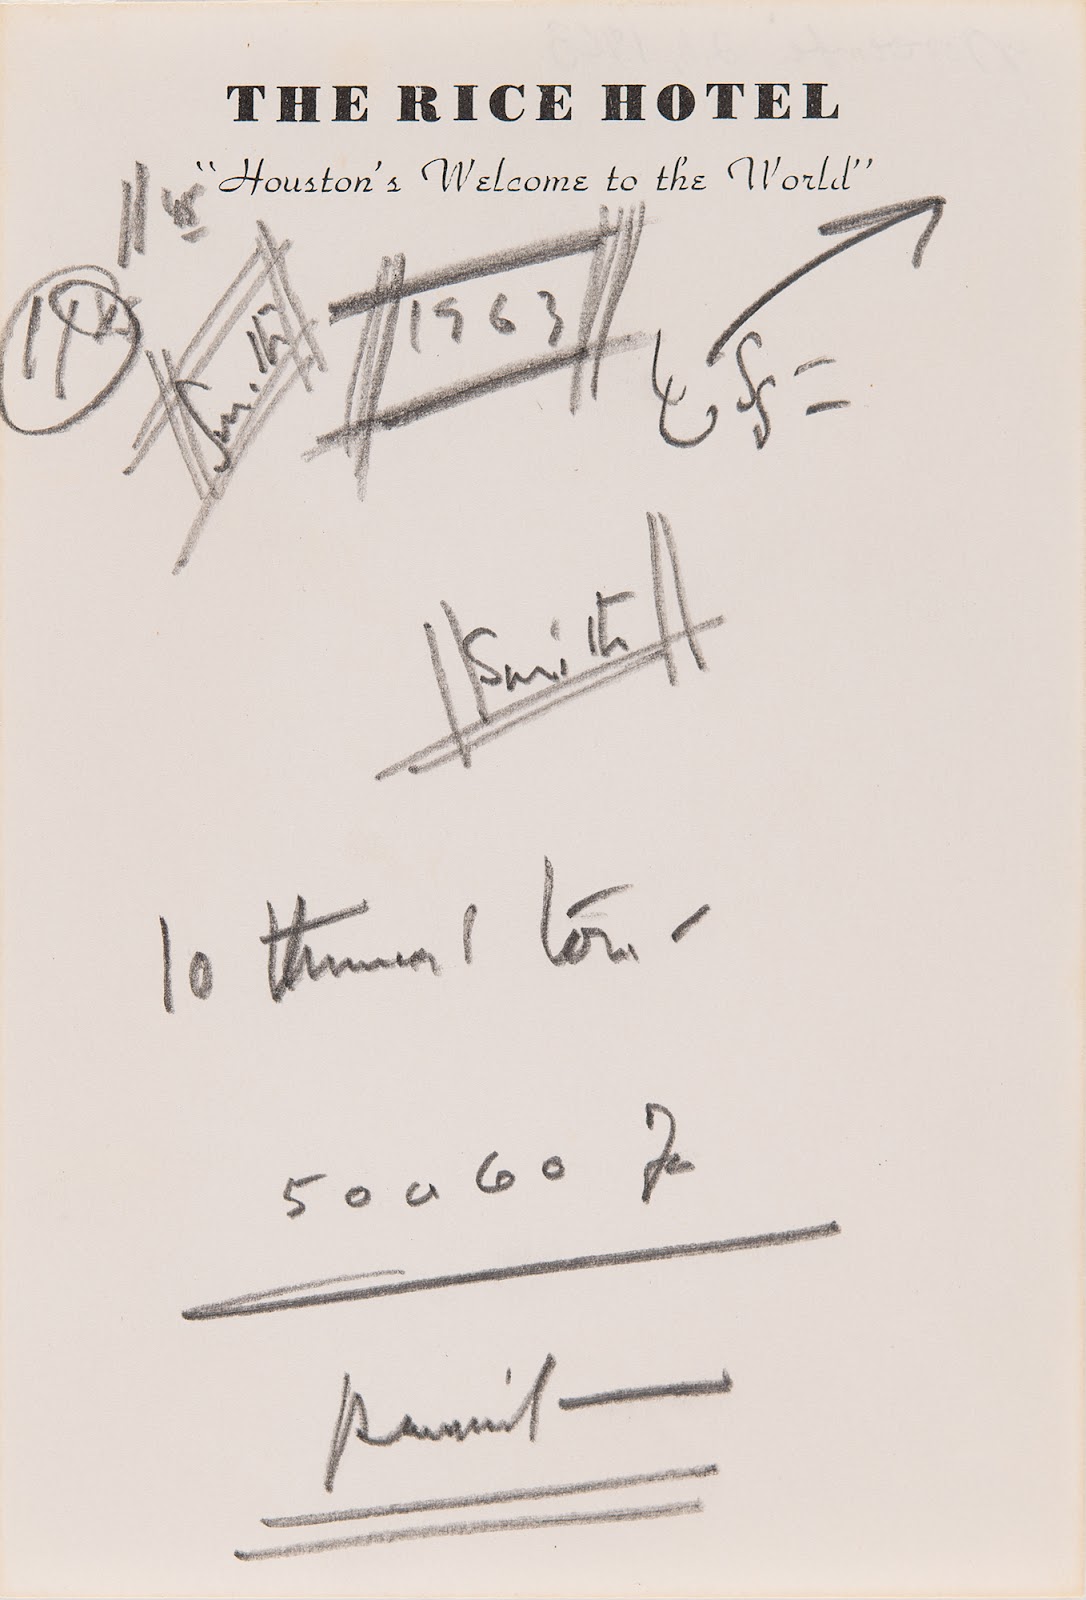 Kennedy’s notes, written in bold pencil on a piece of Rice Hotel stationery.